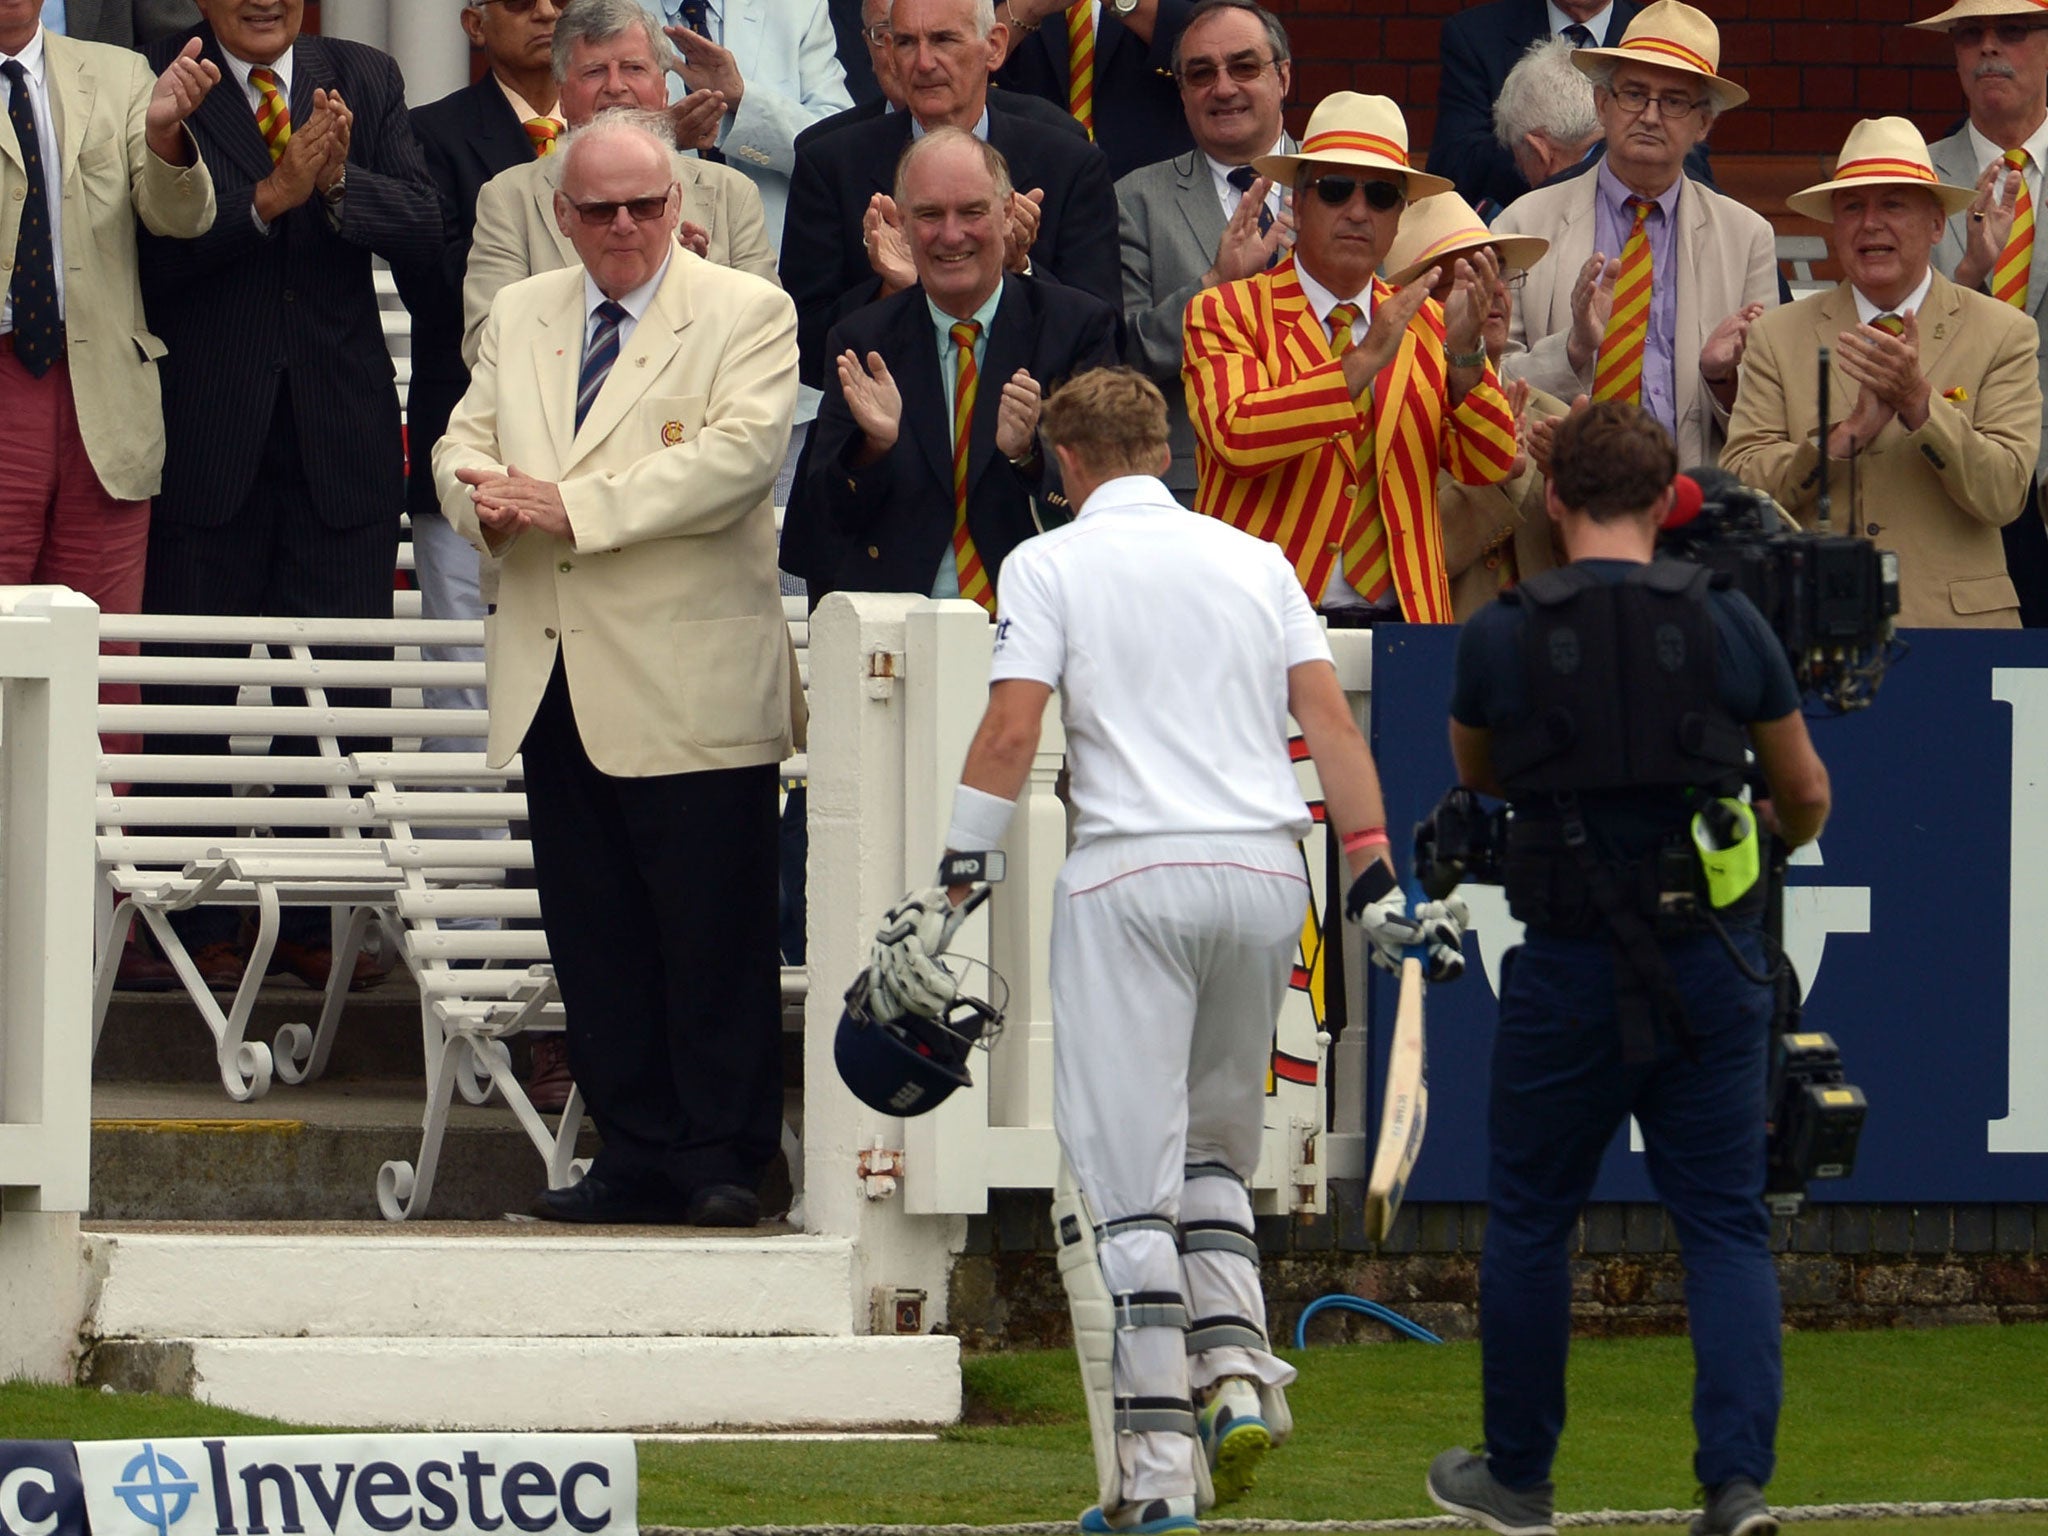 Lord’s praise: The members show their appreciation for Joe Root